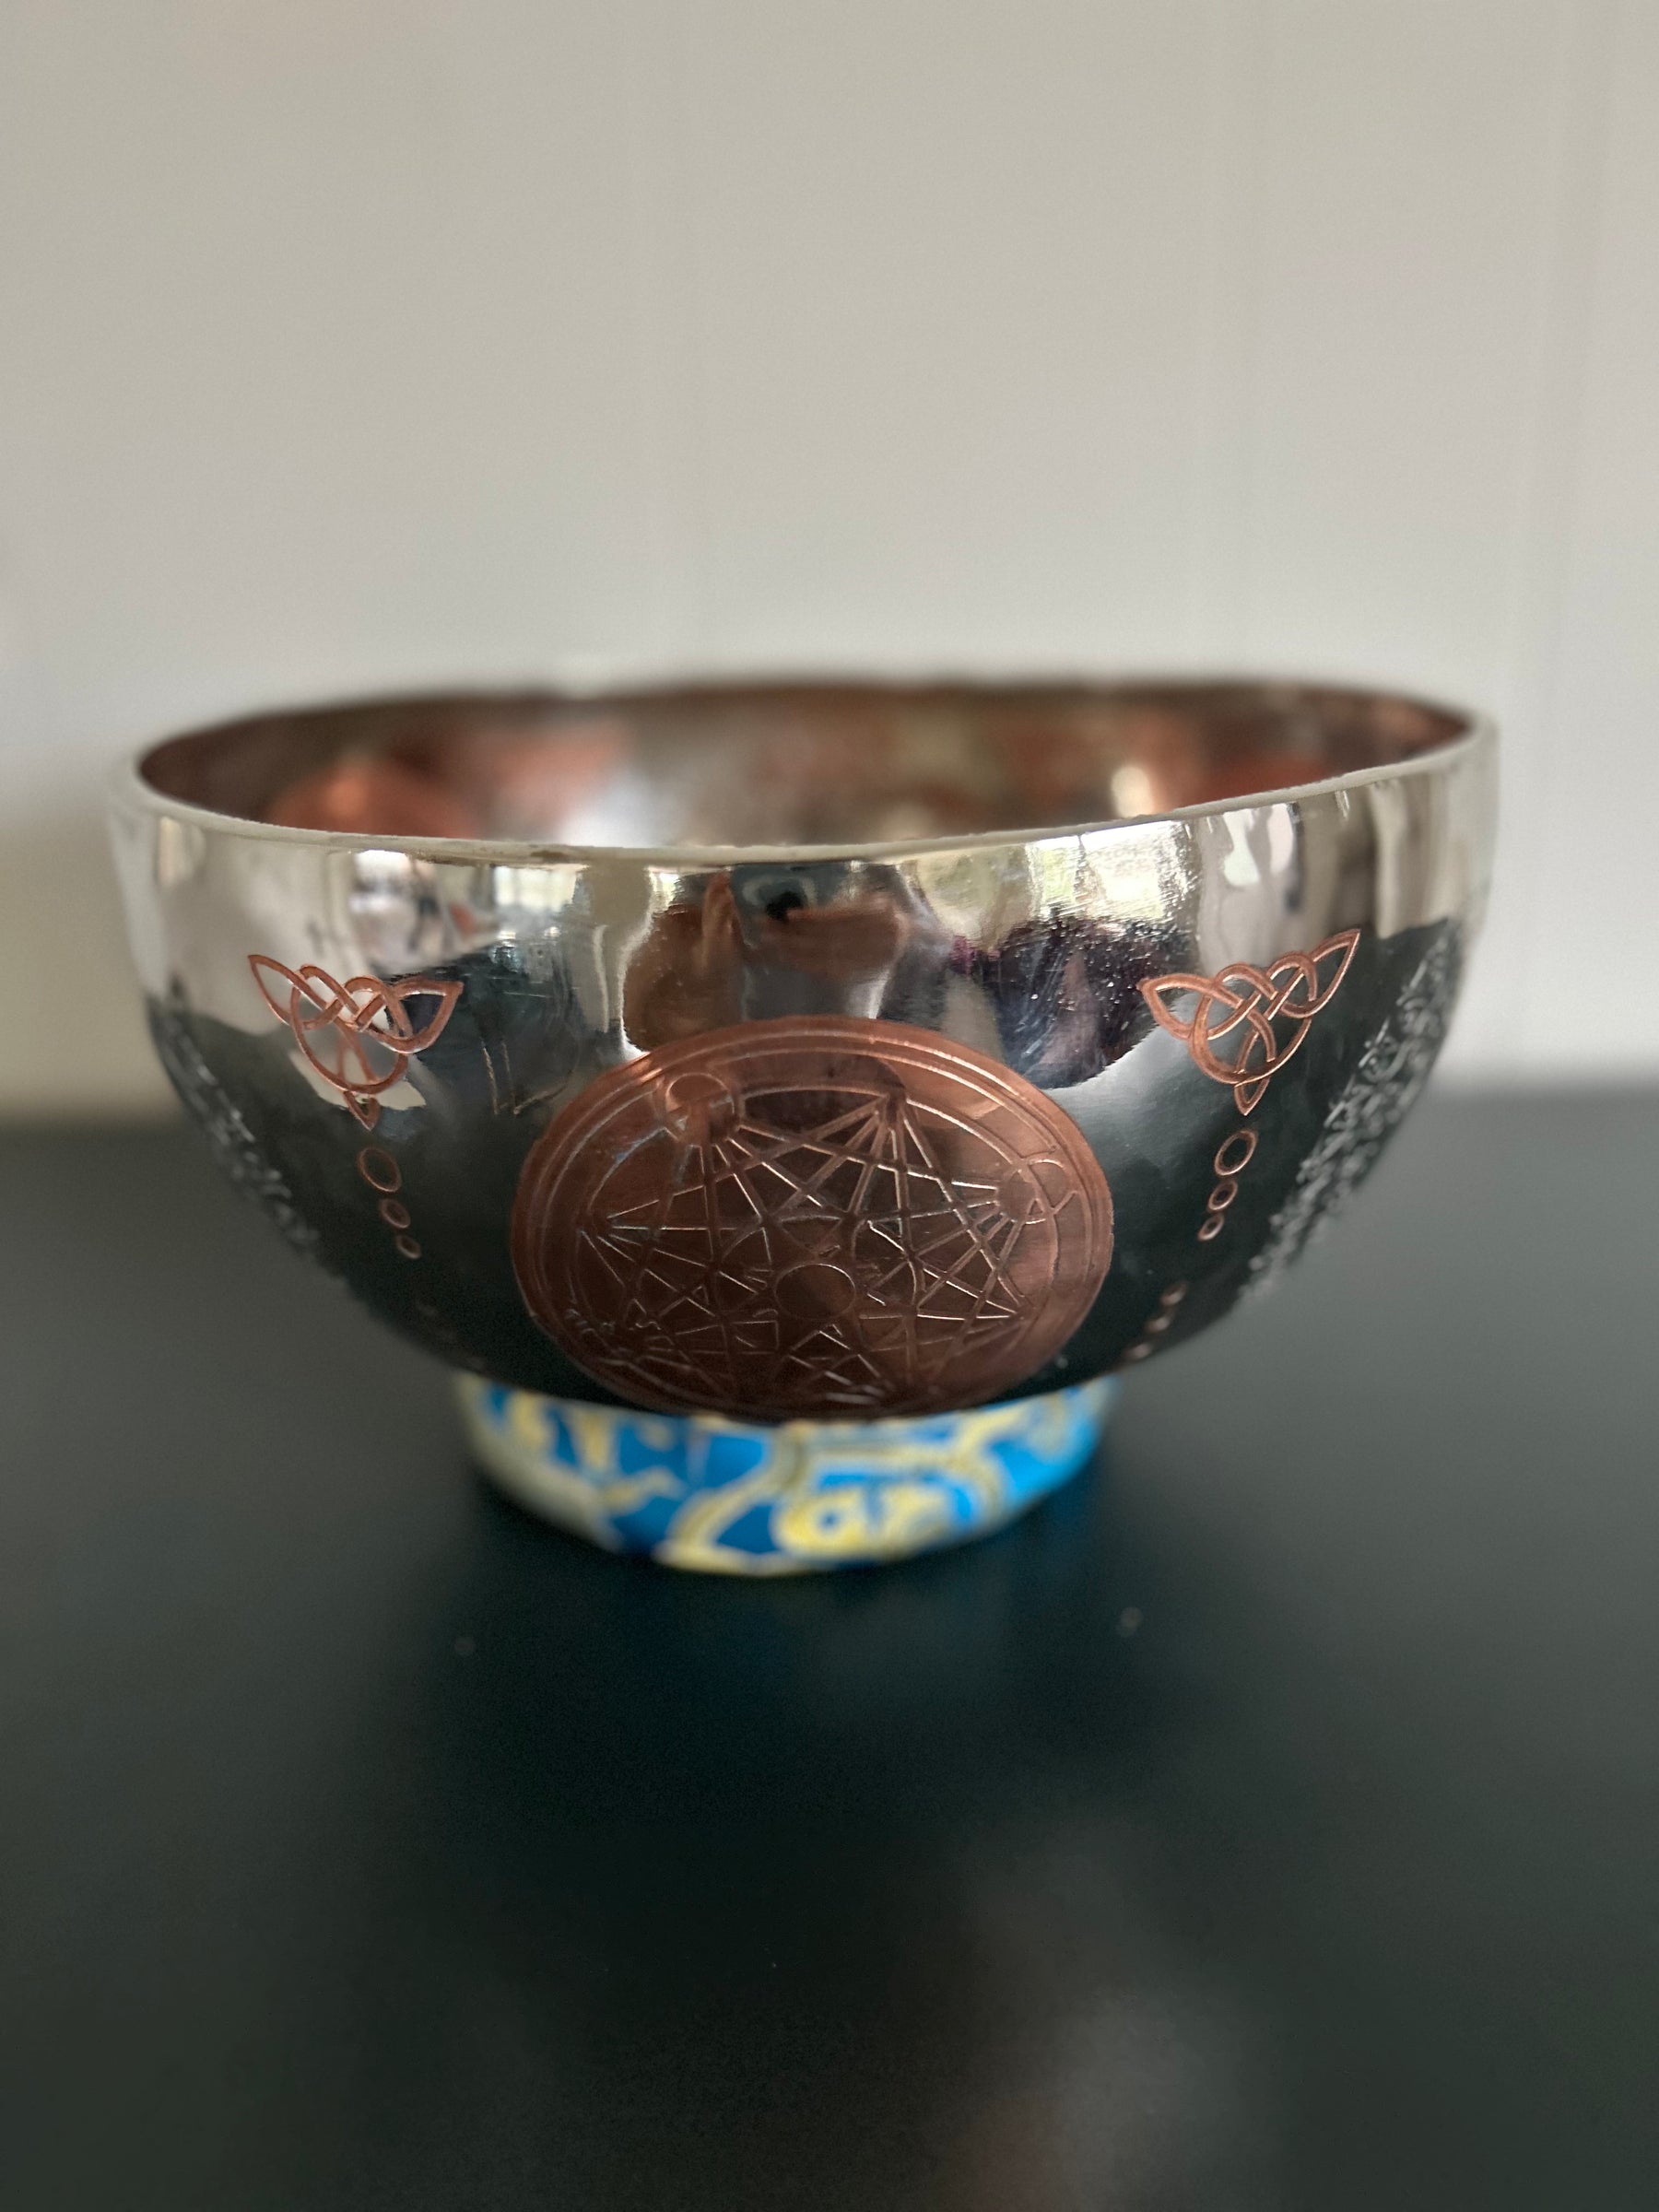 The Crown Jewel Singing Bowl: 10.25 Inch Handmade Etched Bronze Singing Bowl